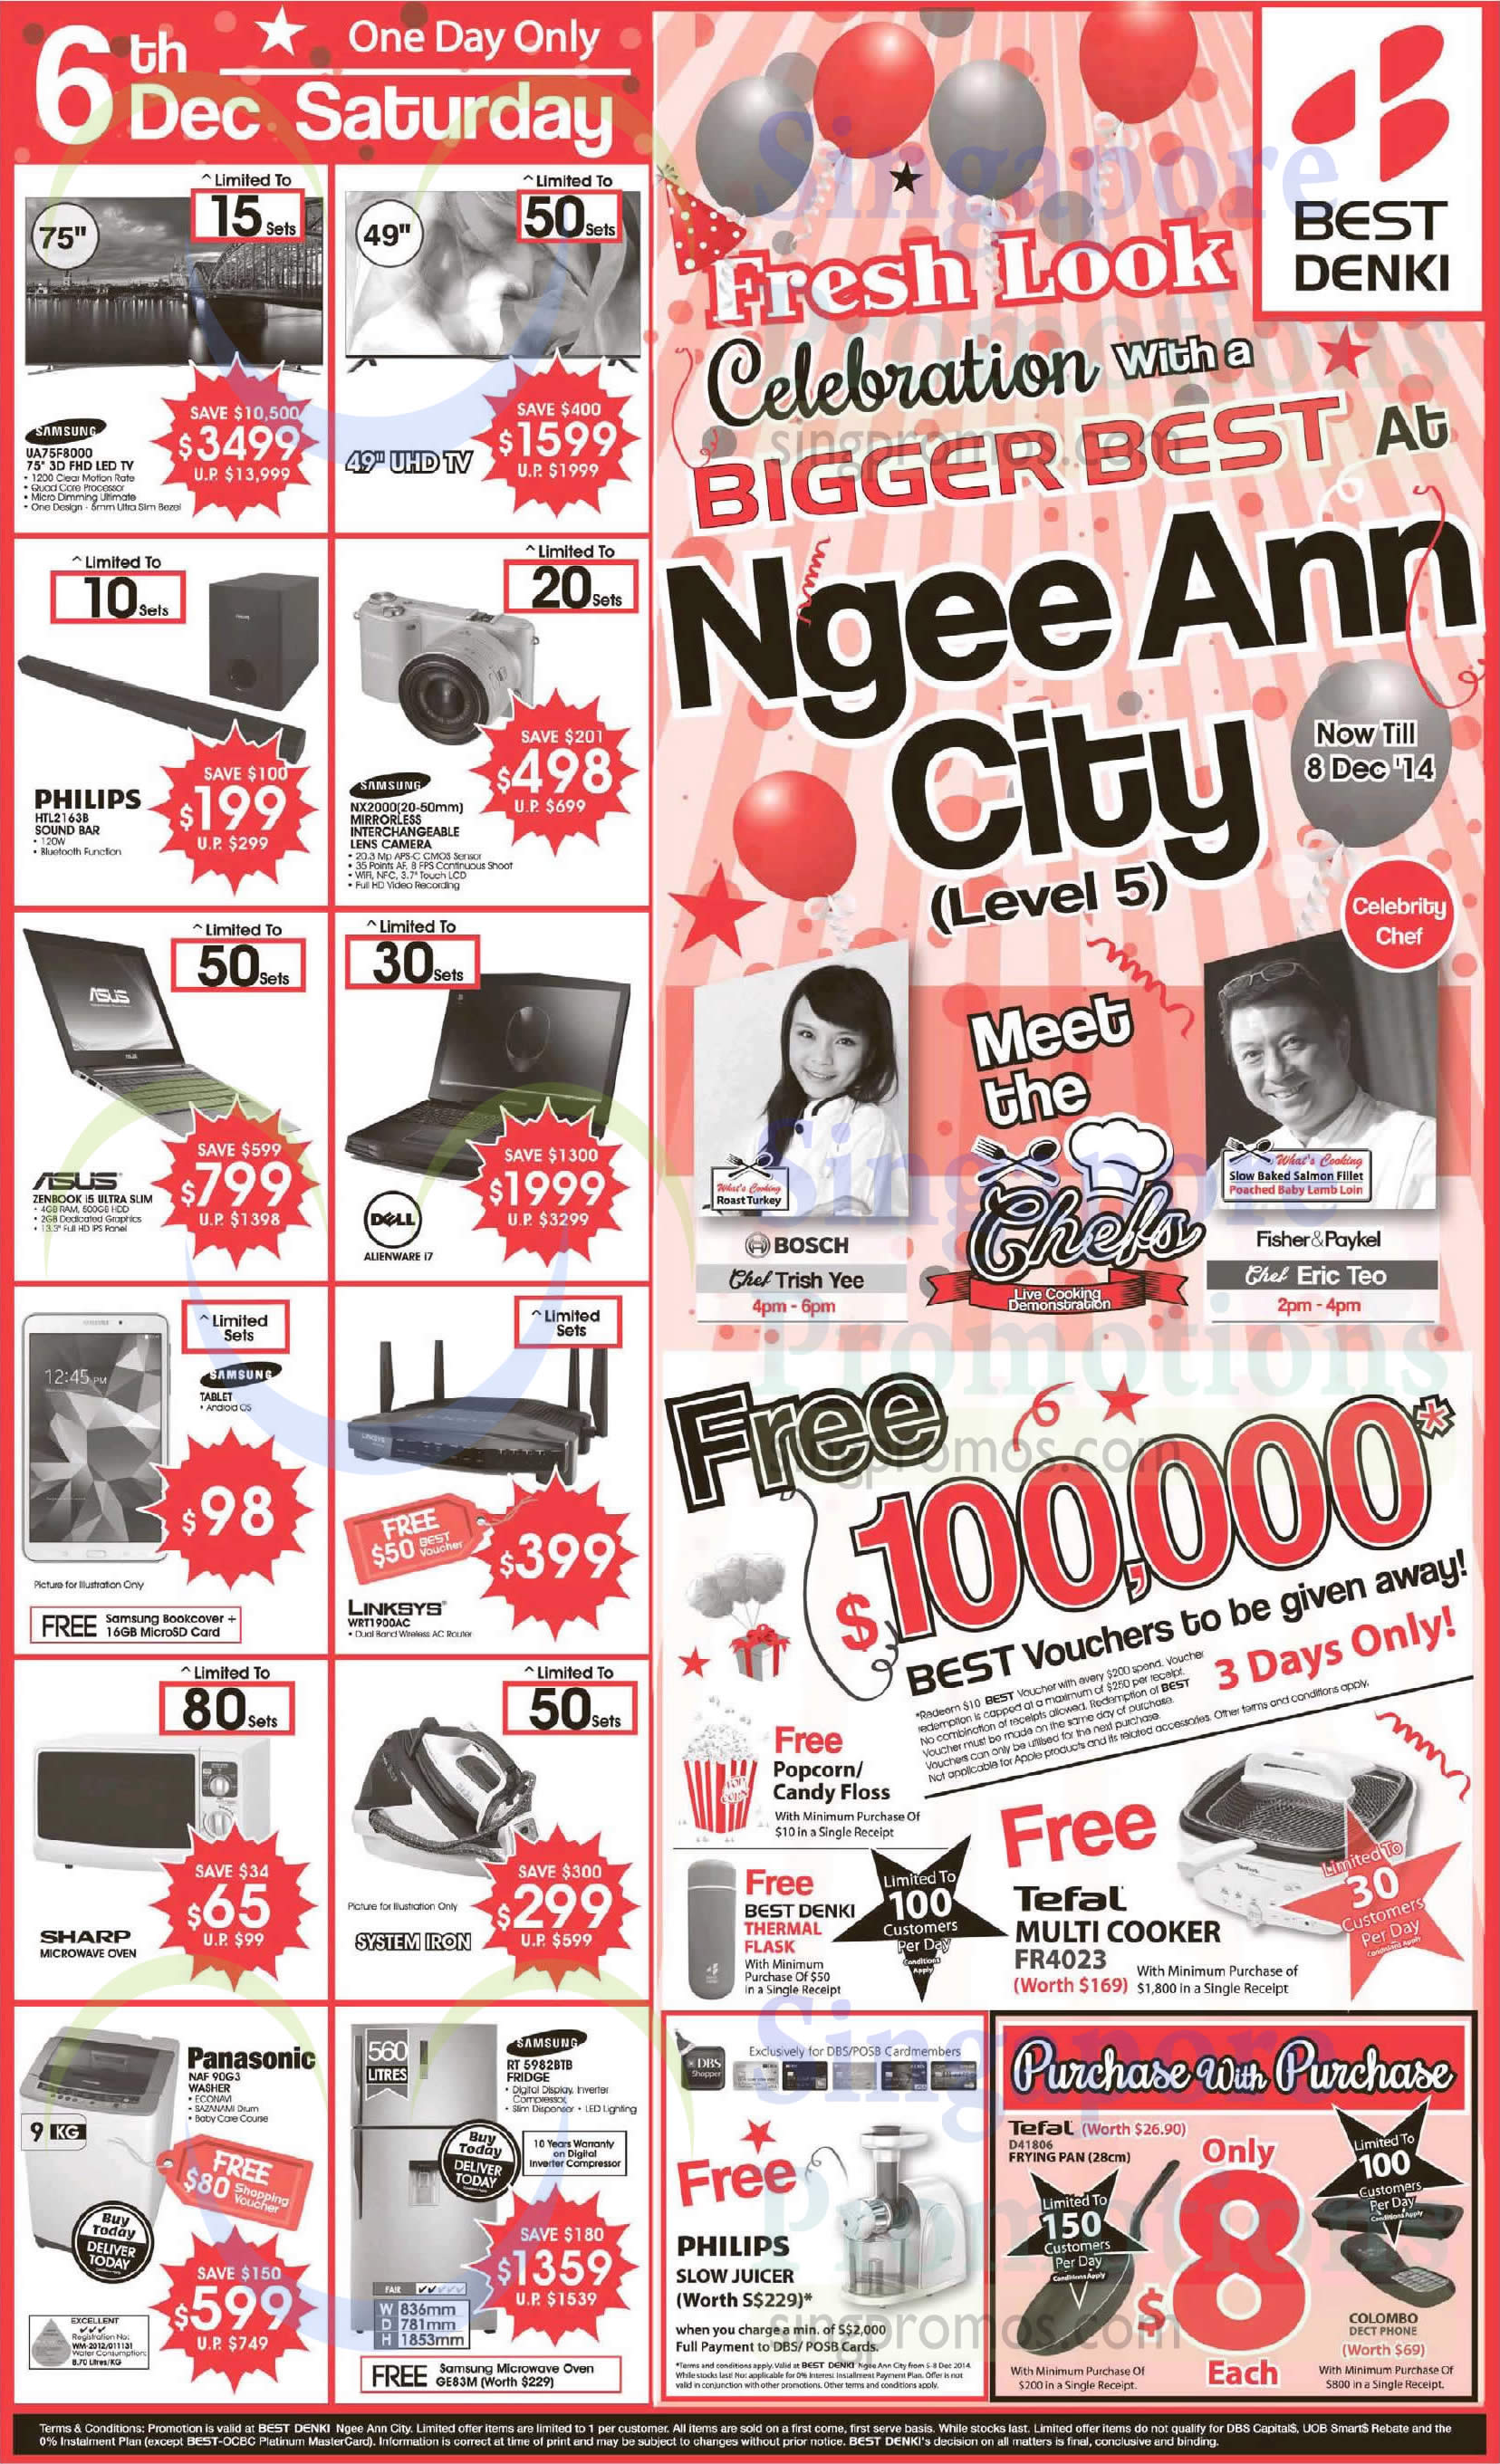 Featured image for Best Denki Ngee Ann City Celebration Offers 5 - 8 Dec 2014